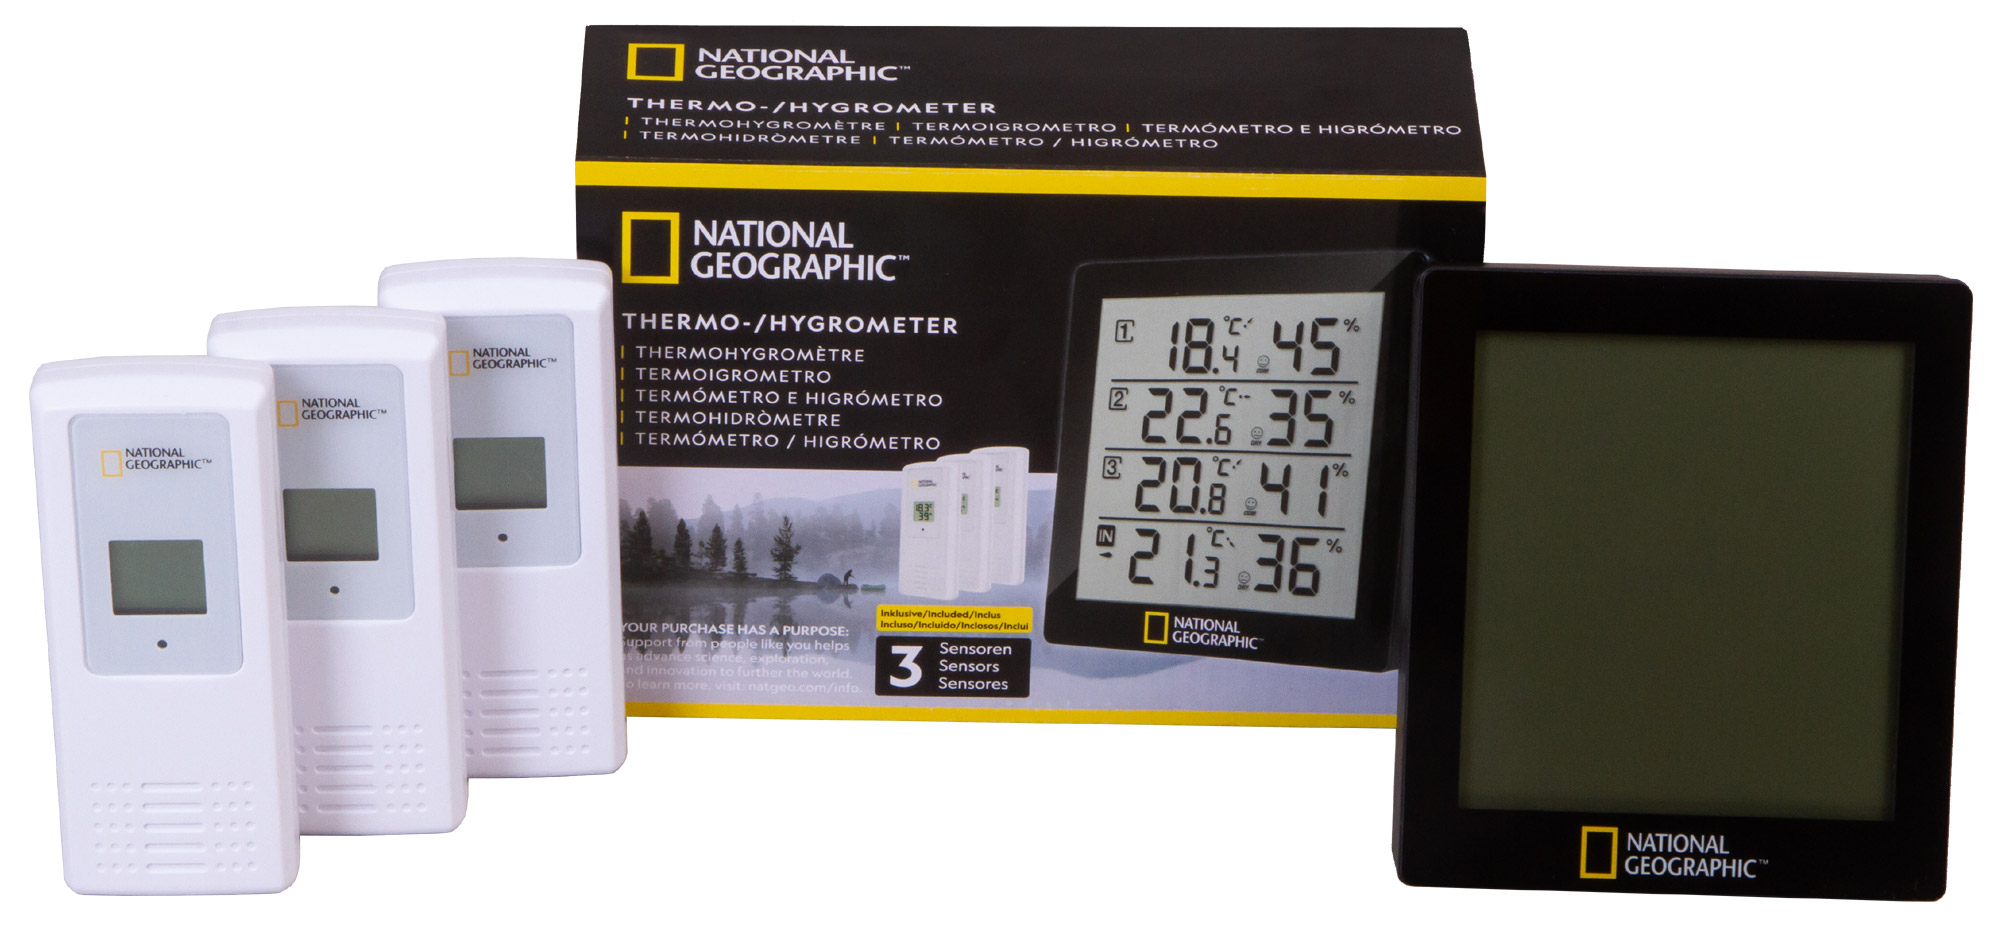 Bresser%20National%20Geographic%20Thermo-Hygrometer%204%20Measurement%20Results,%20black